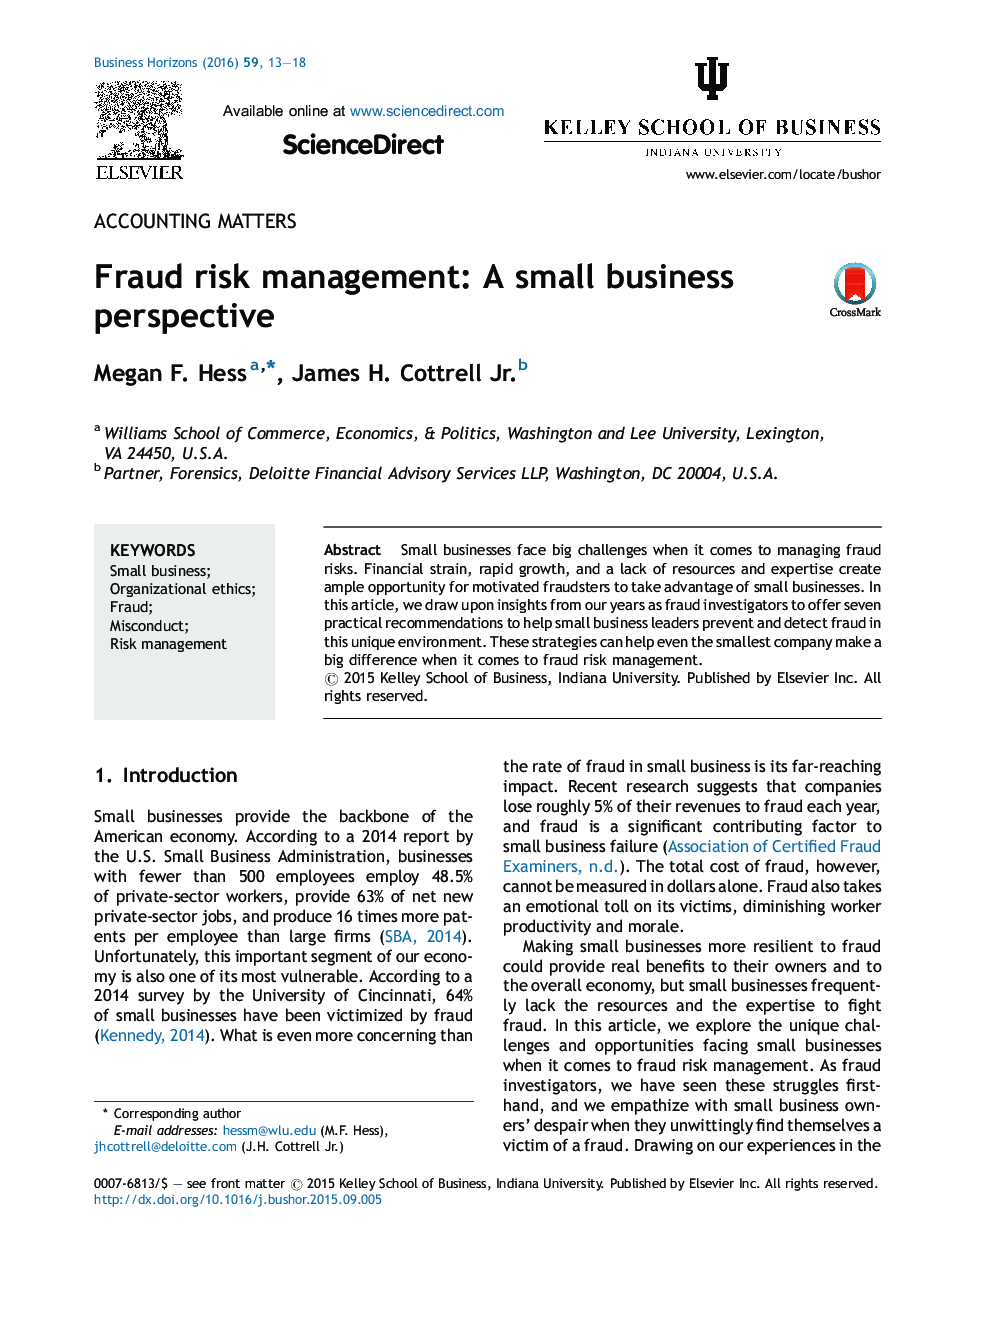 Fraud risk management: A small business perspective